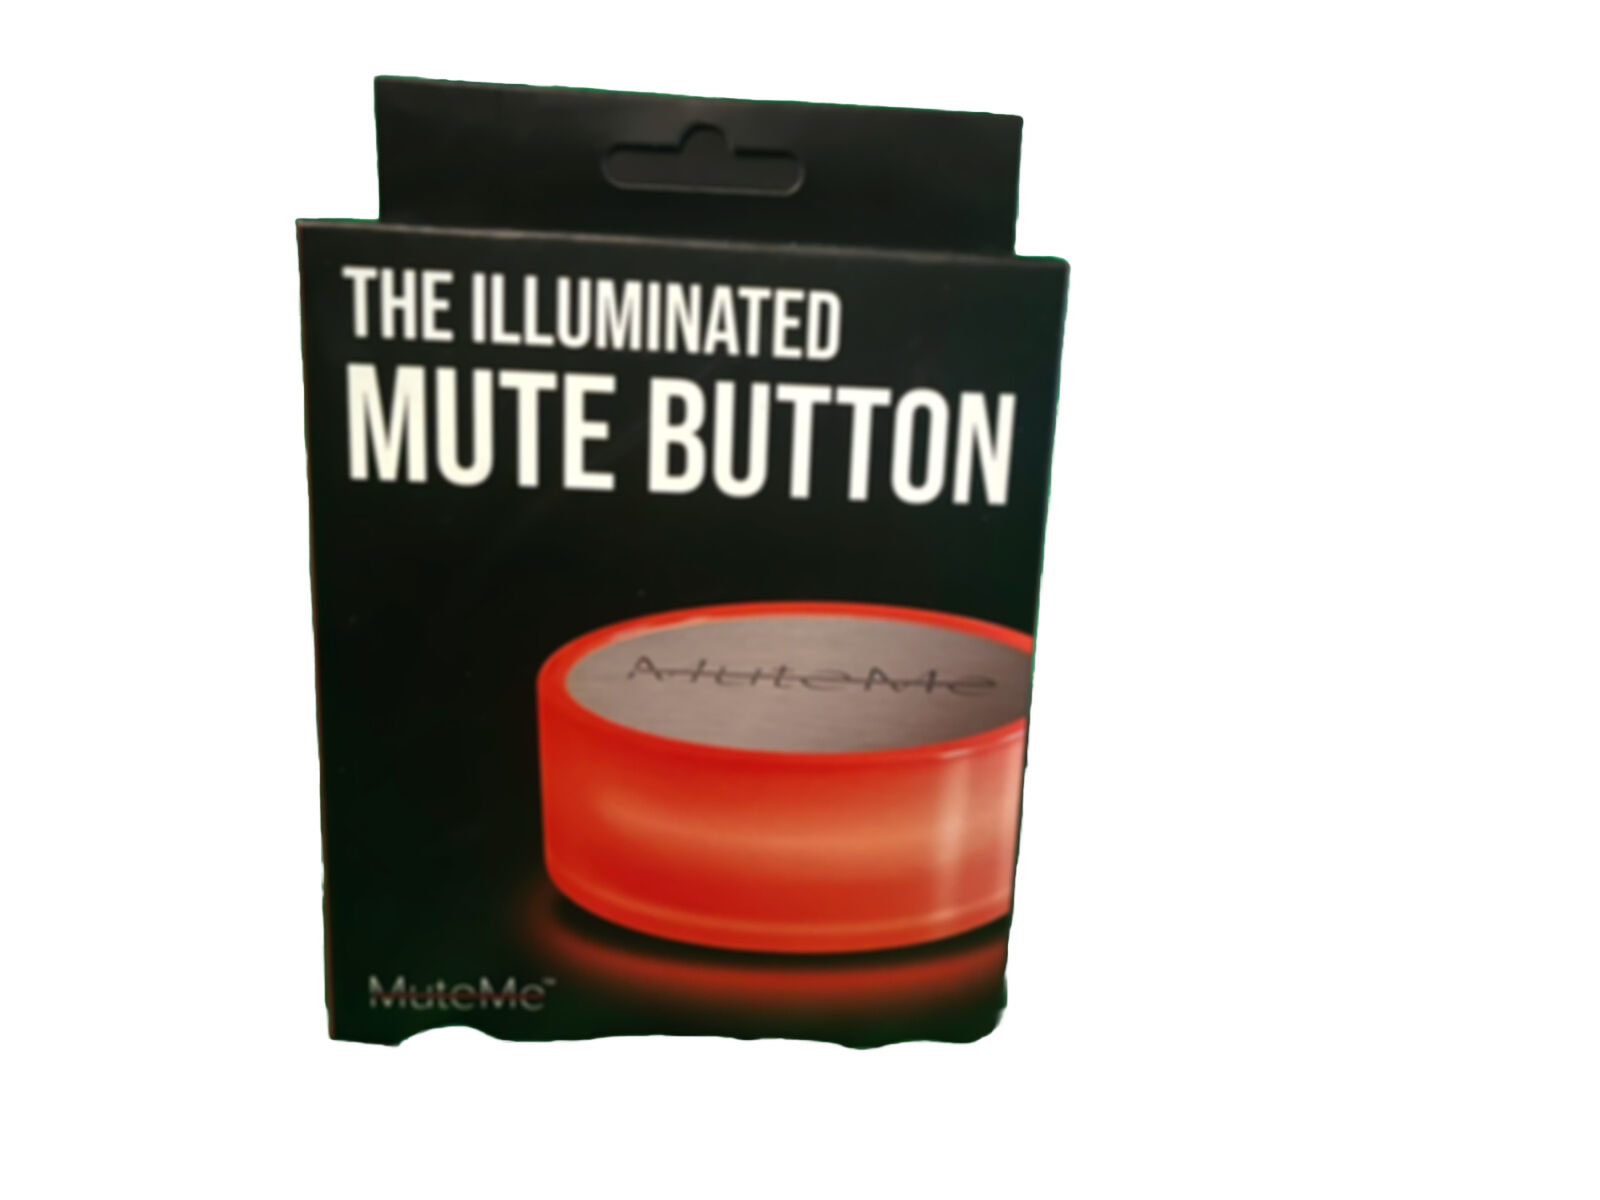 Mute Me Illuminated Mute Button Works with Any App Never Opened 